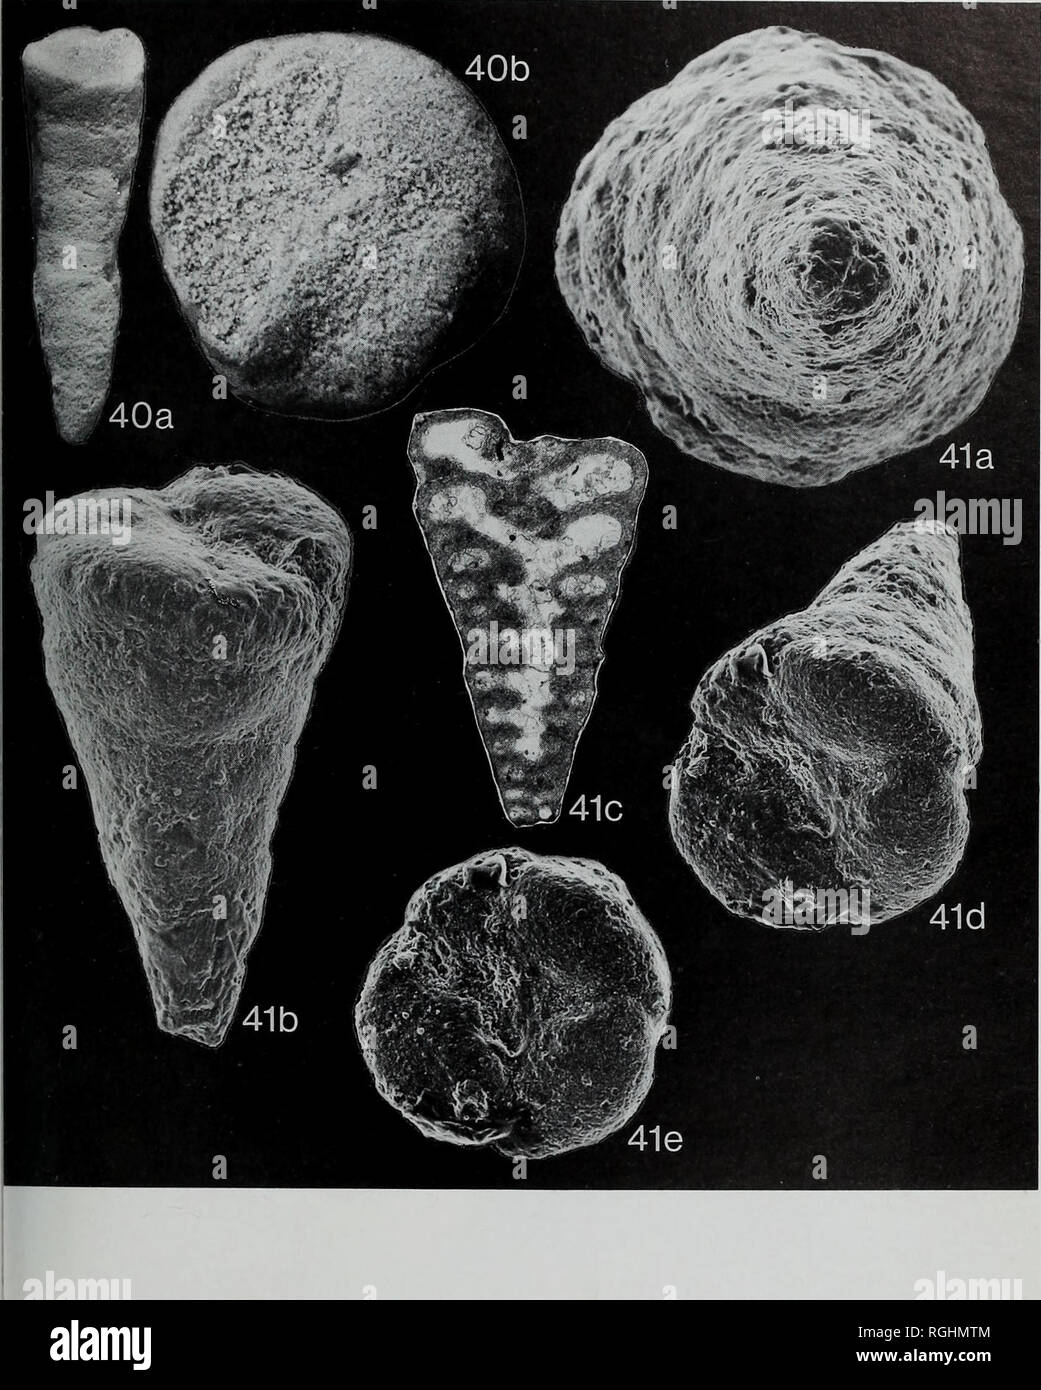 . Bulletin of the British Museum (Natural History), Geology. MESOZOIC CHRYSALIDINIDAE OF MIDDLE EAST 123. igs 40-41 Redmondoidesprimitivus (Redmond); from Saudi Arabia, Riyadh Water Well-1, 2400-2410 ft depth, Middle Dhruma Formation, late Bajocian. Figs 40a-b, holotype AMNH FT-1277; a, axial view (length 680 urn), x 100; b, terminal view, x 290. Figs 41a-e, paratype AMNH FT-1278 (Figs 41a, b, d, e are the original, solid specimen, now sectioned as Fig. 41c); a, initial view, x 250; b, axial view (length 540 urn), x 175; c, axial section, x 130; d, oblique terminal view, x 175; e, terminal vie Stock Photo